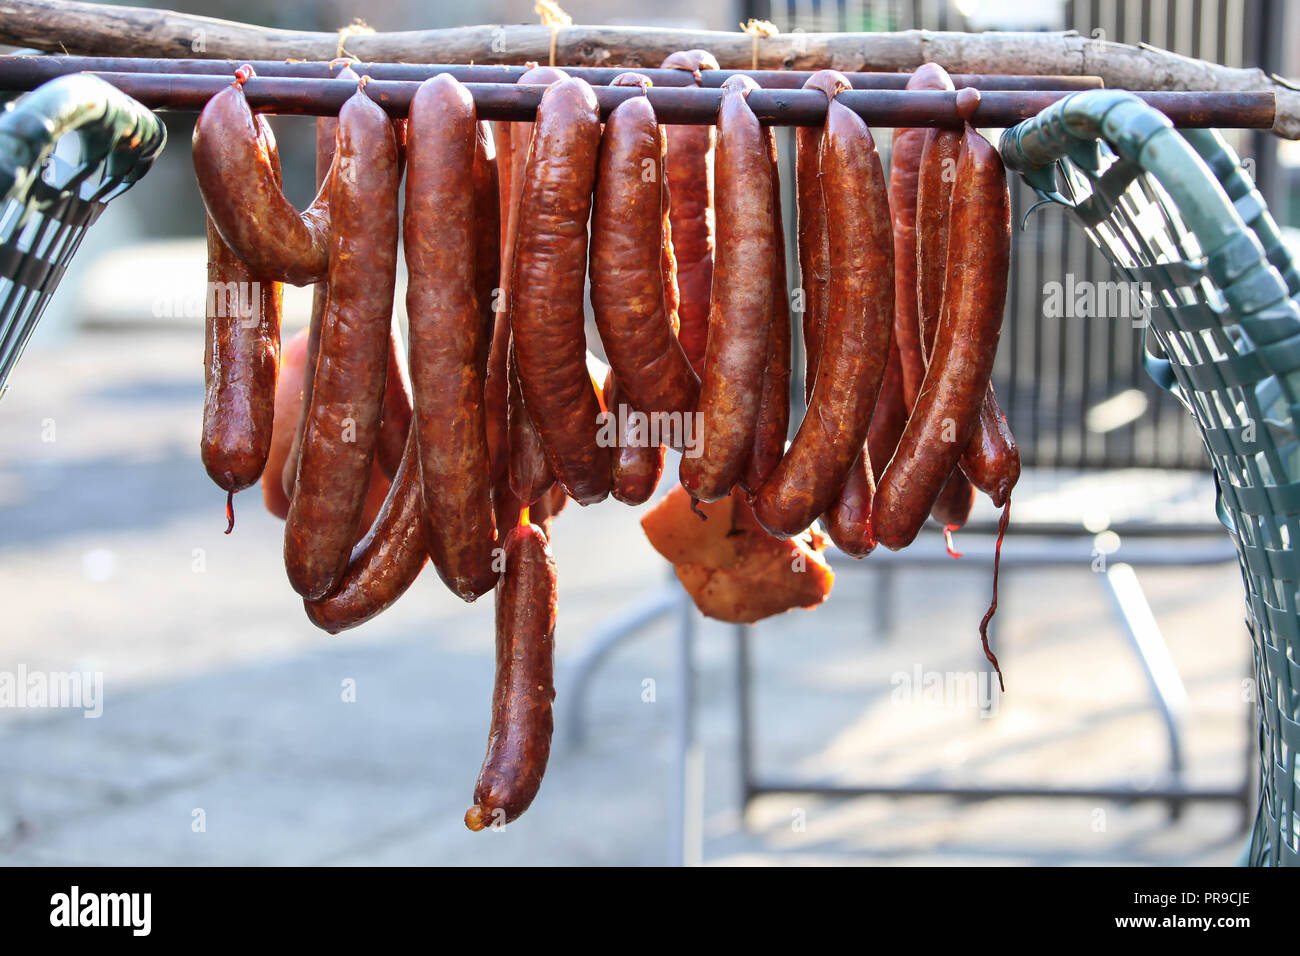 Smoked sausages hanging outside Stock Photo